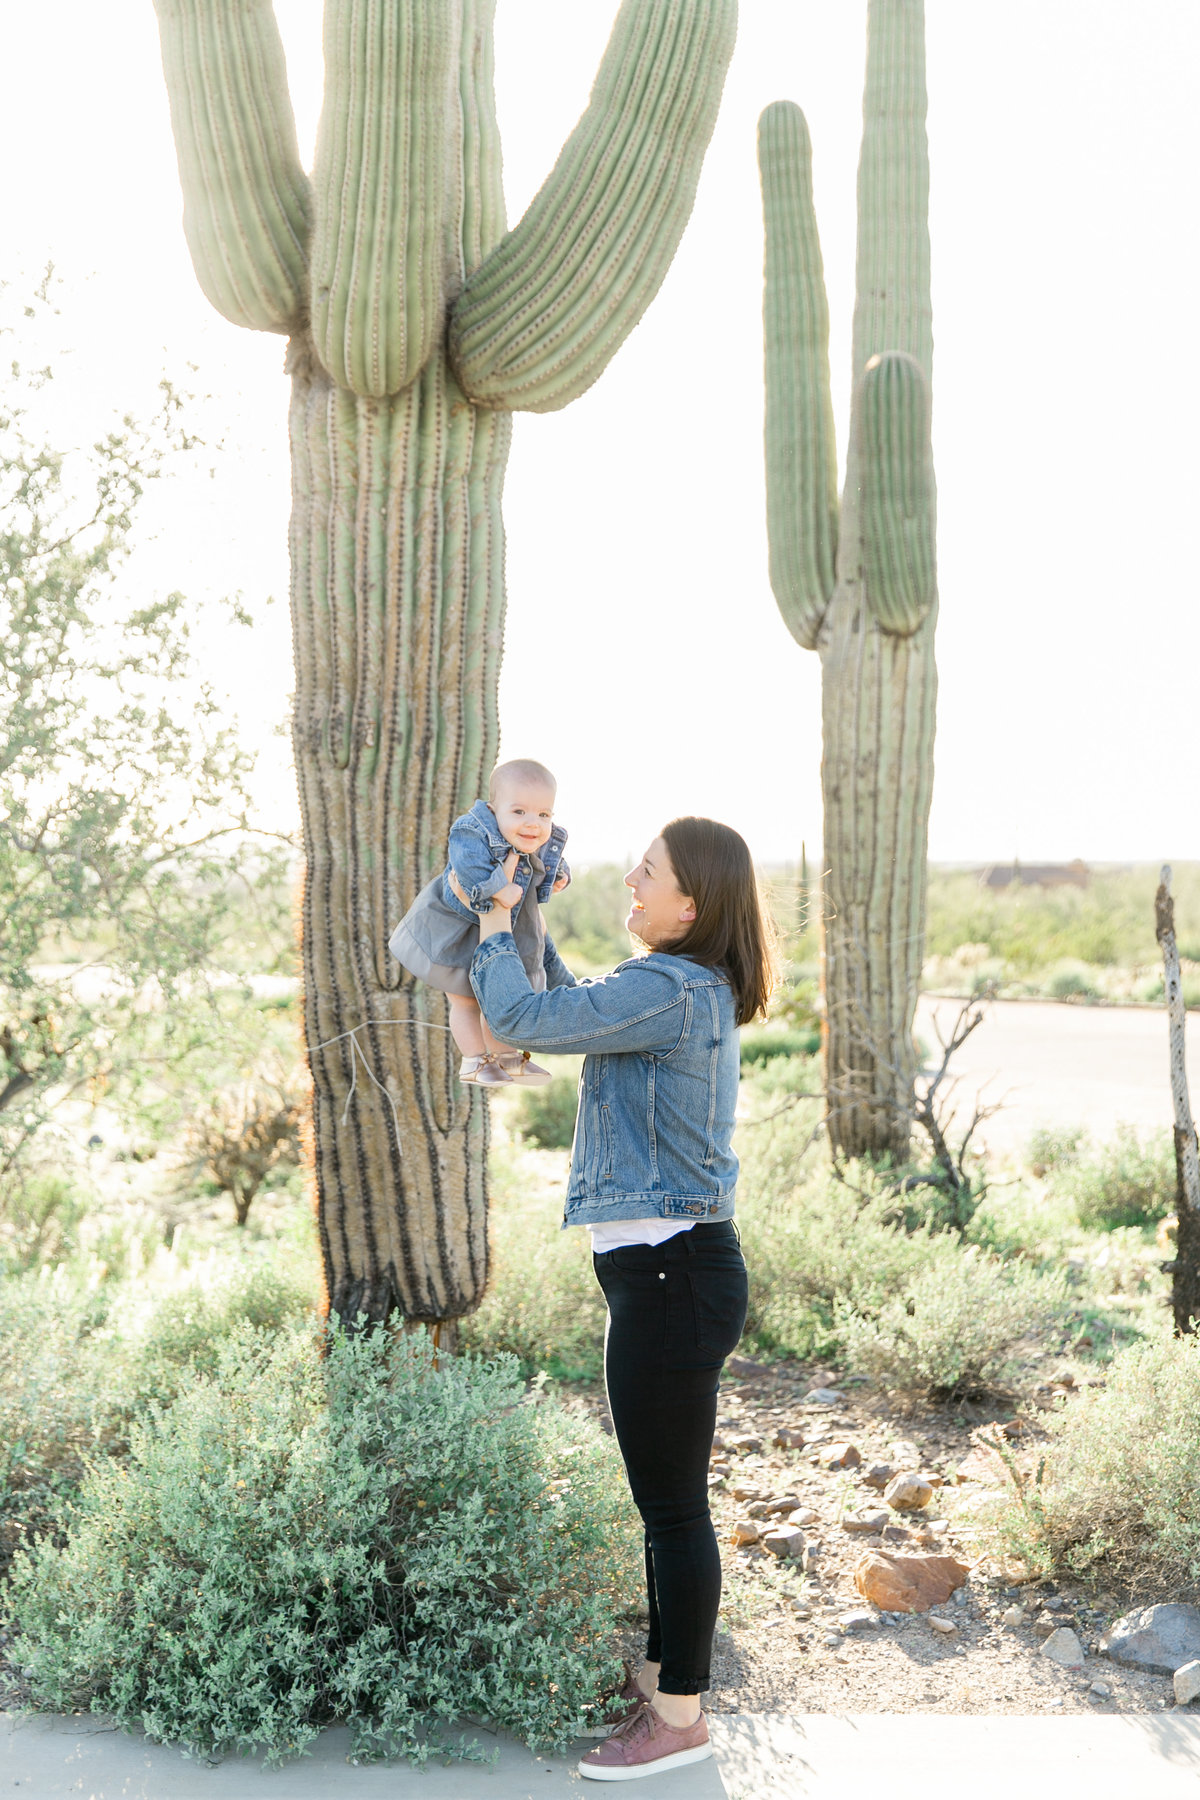 Karlie Colleen Photography - Scottsdale family photography - Victoria & family-27